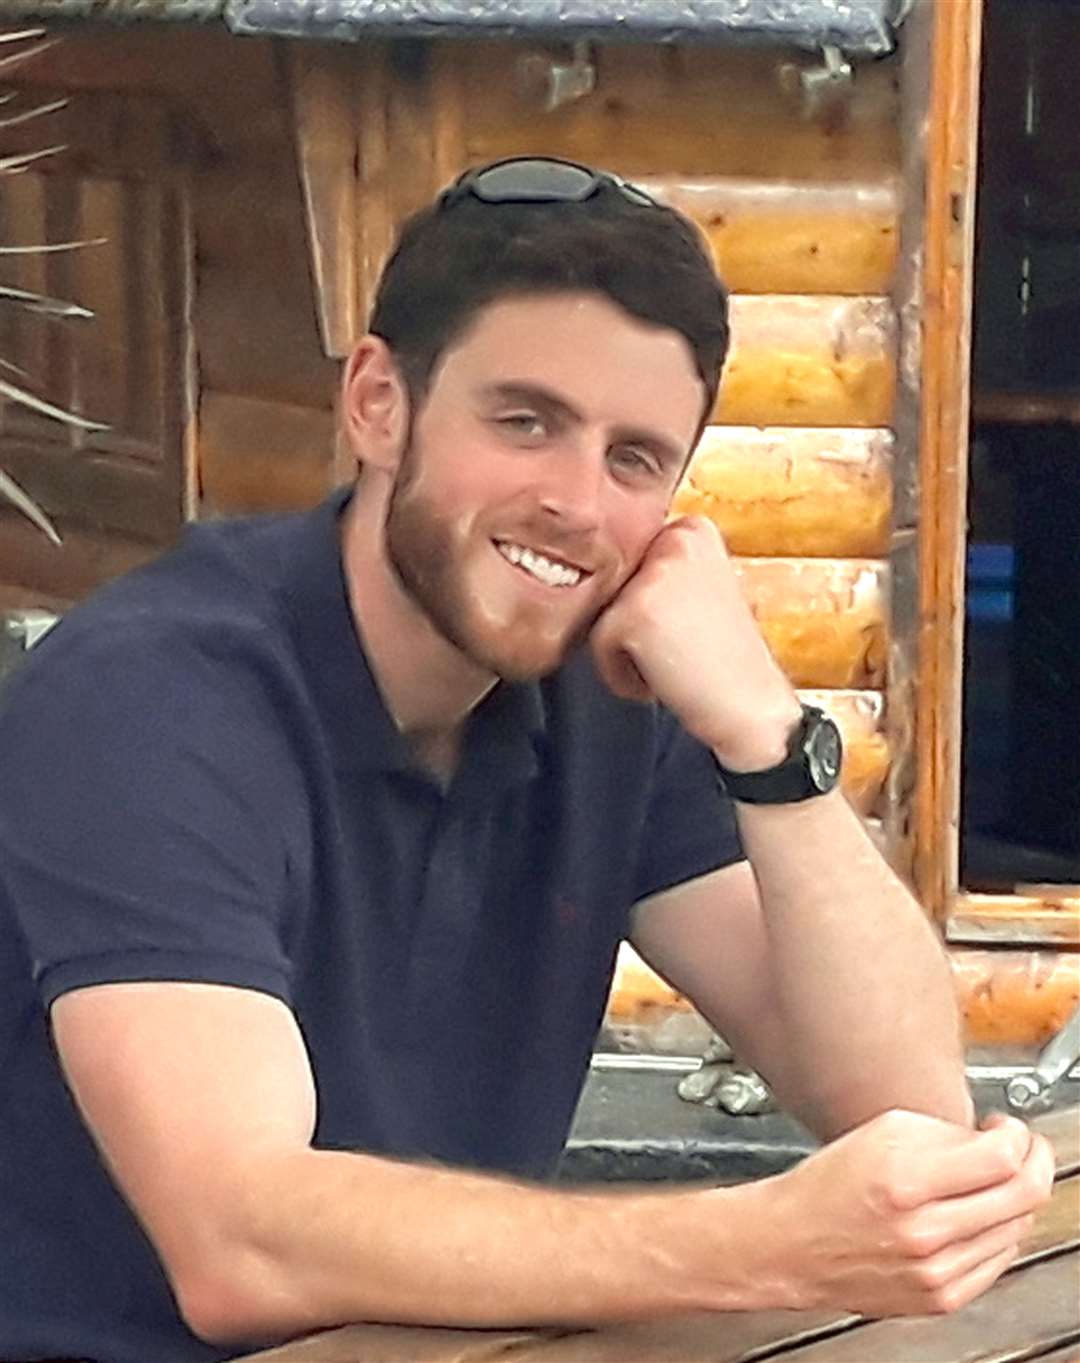 Thames Valley Police officer Andrew Harper, 28, who was killed on duty in Berkshire in August 2019 (Thames Valley Police/PA)